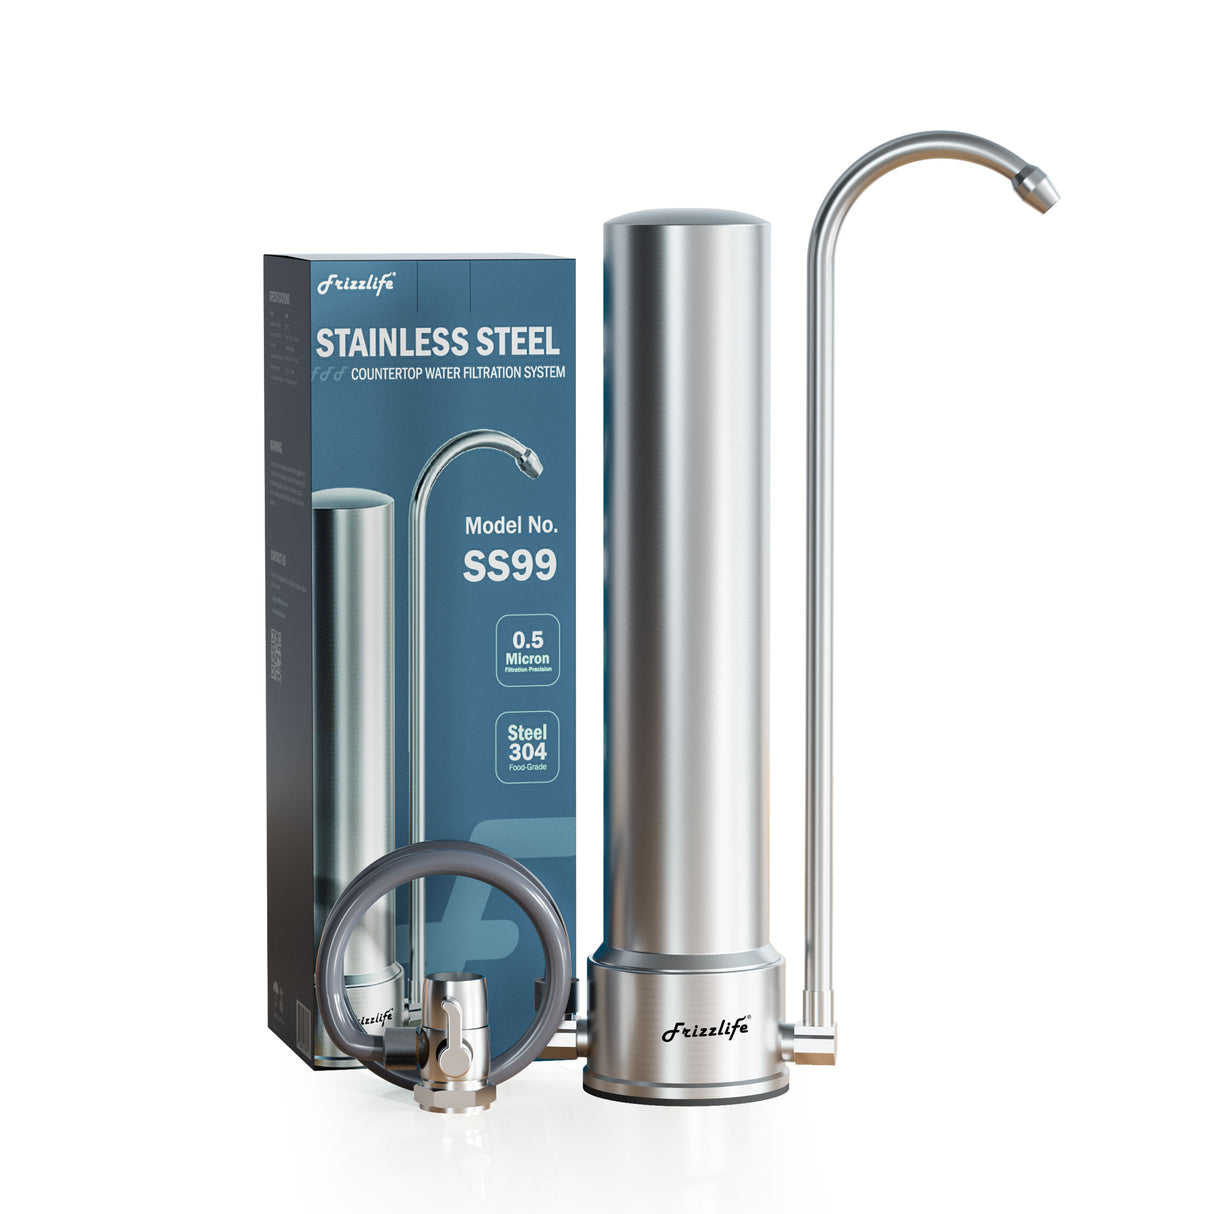 Frizzlife SS99 Countertop Water Filter System, Stainless Steel Faucet Water Filtration for 8000 Gallons, 0.5 Micron NSF Certified Elements Reduces 99.99% Lead, Chlorine, Heavy Metals, Bad Taste & Odor